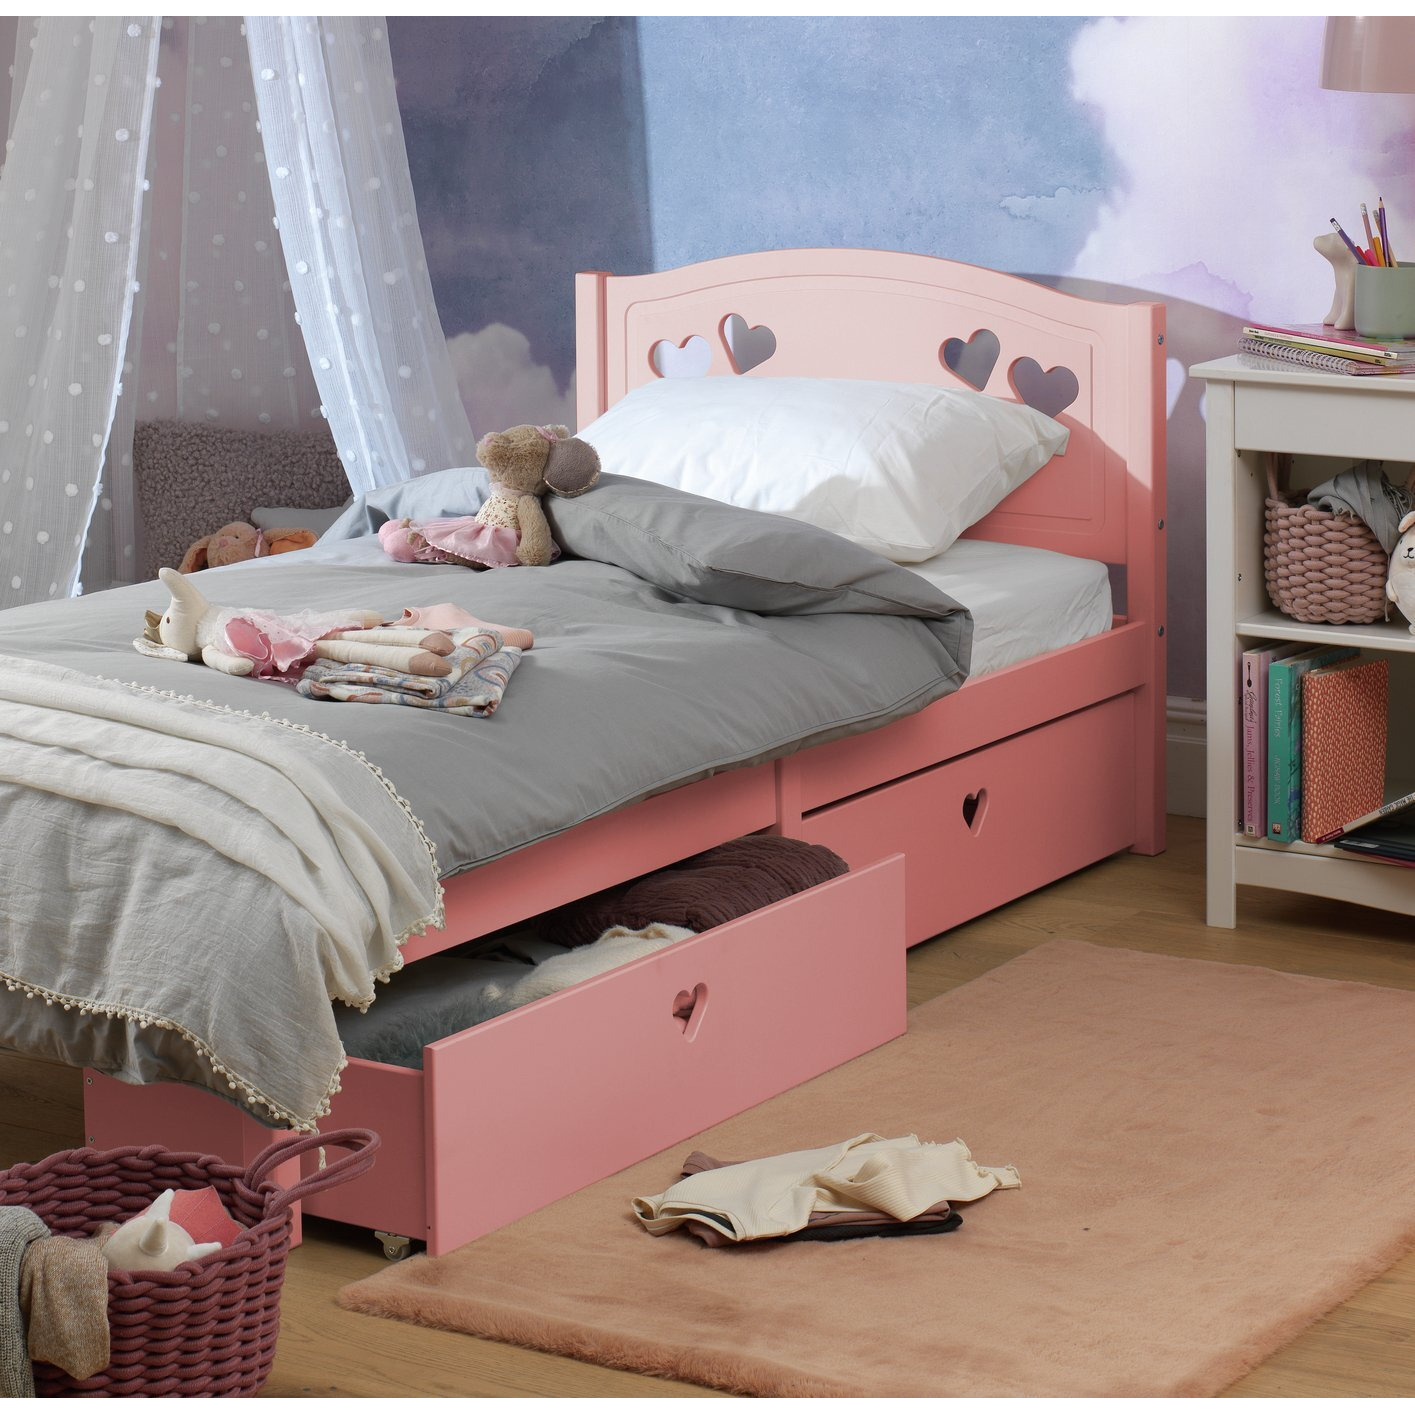 Habitat Mia Single Bed Frame With 2 Drawers - Pink - image 1